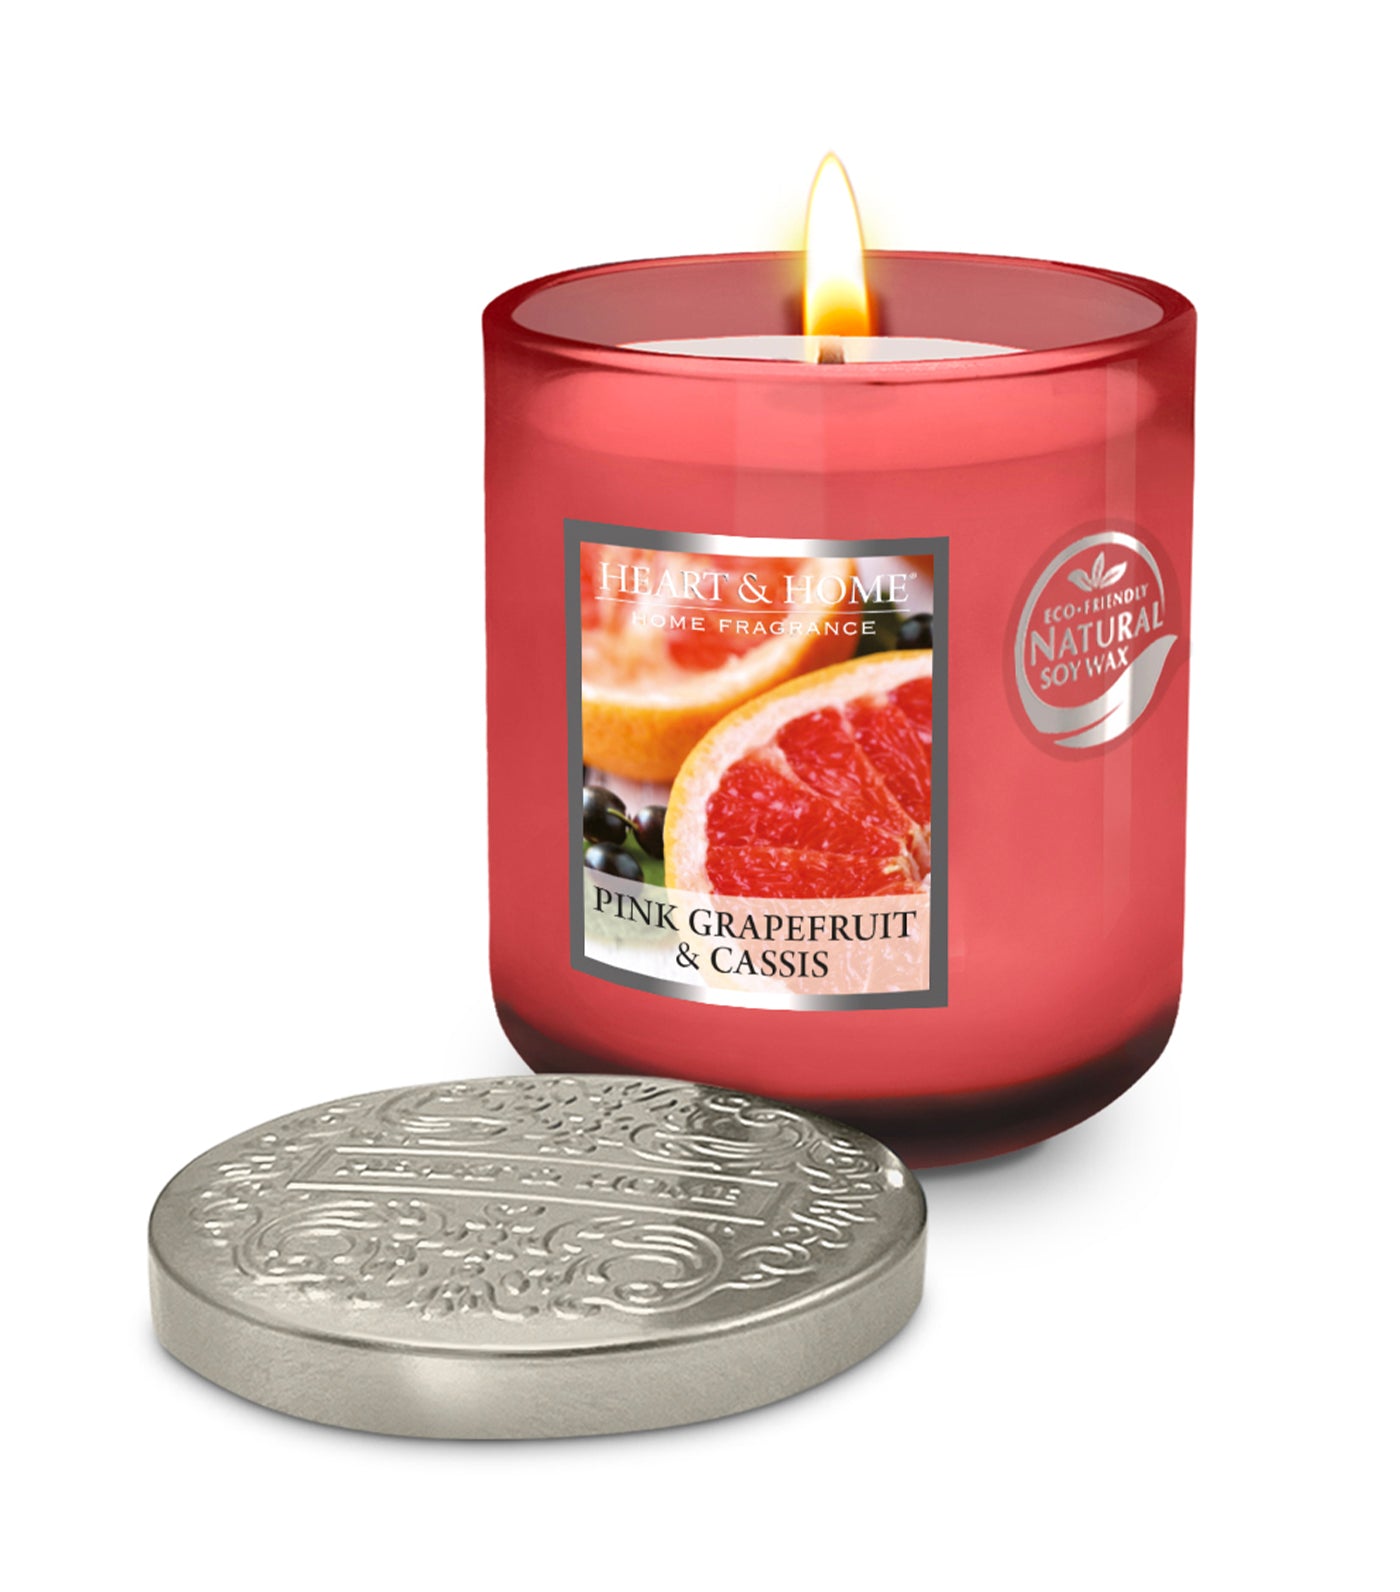 Heart & Home Pink Grapefruit Eco Soy Candle